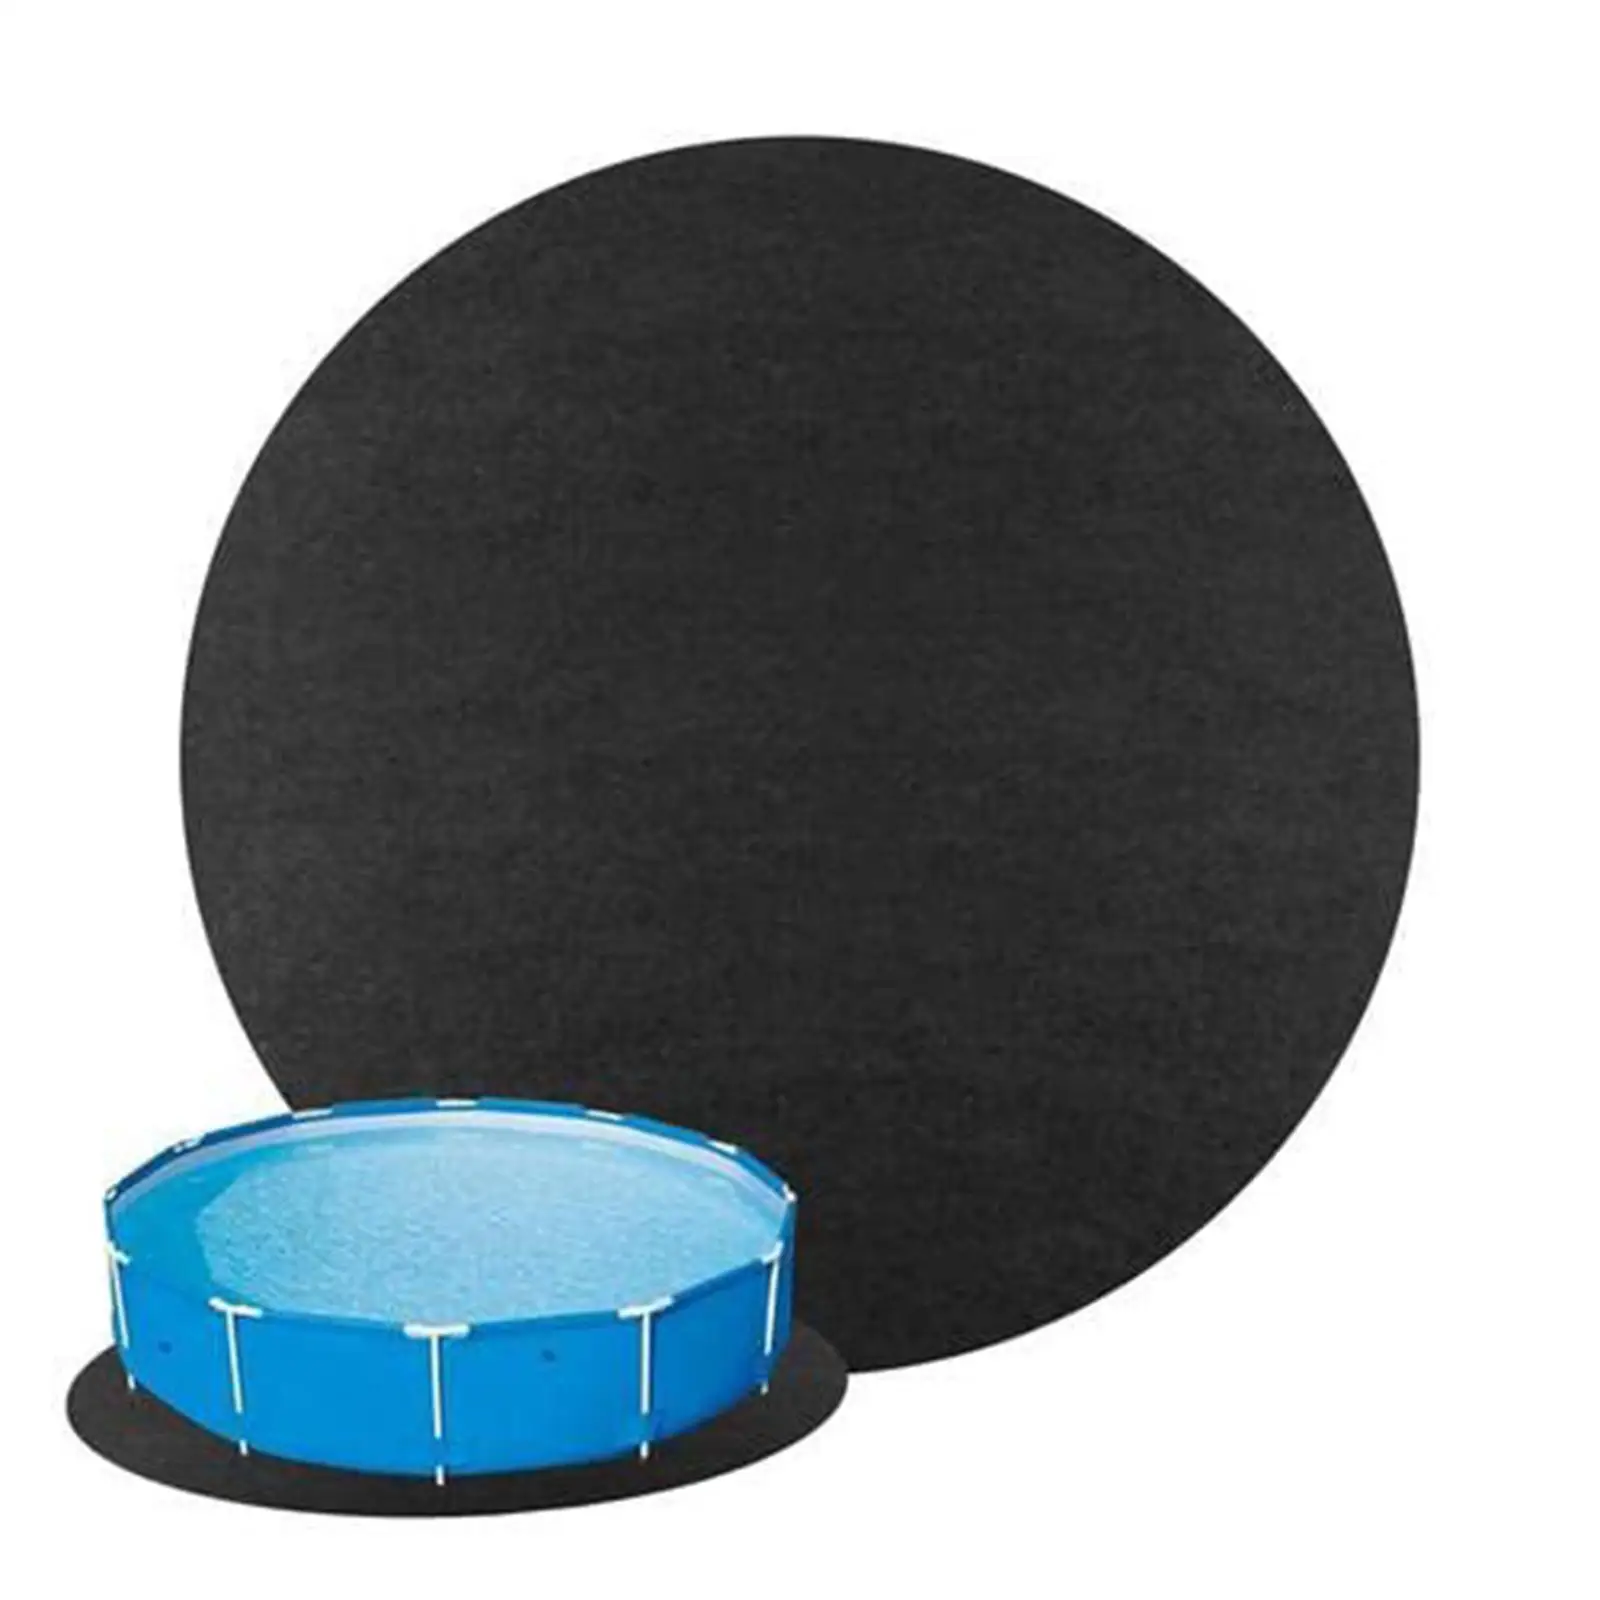 Swimming Pool Liner Pad, Summer Durable Pool Liner Pads for above Ground Pool, for 4m Garden Swimming Pool Inflatable Pool